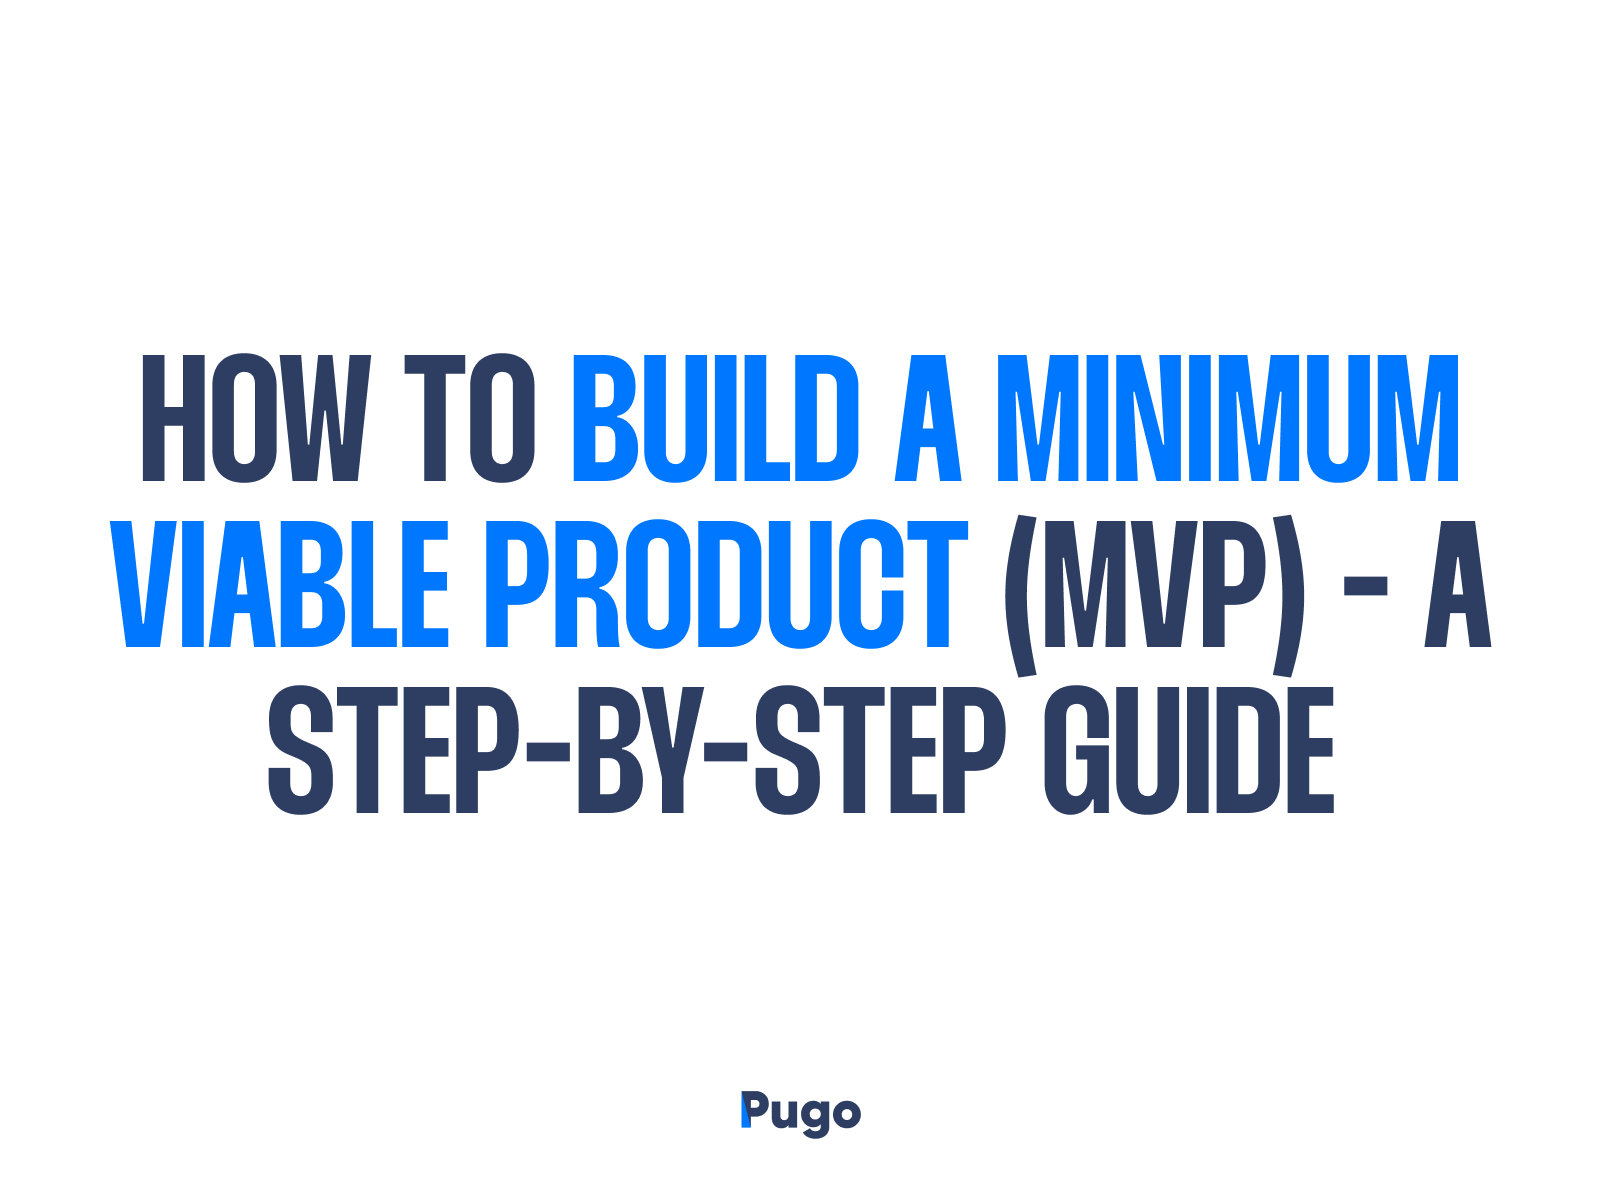 How to build a minimum viable product (MVP) – A step-by-step guide